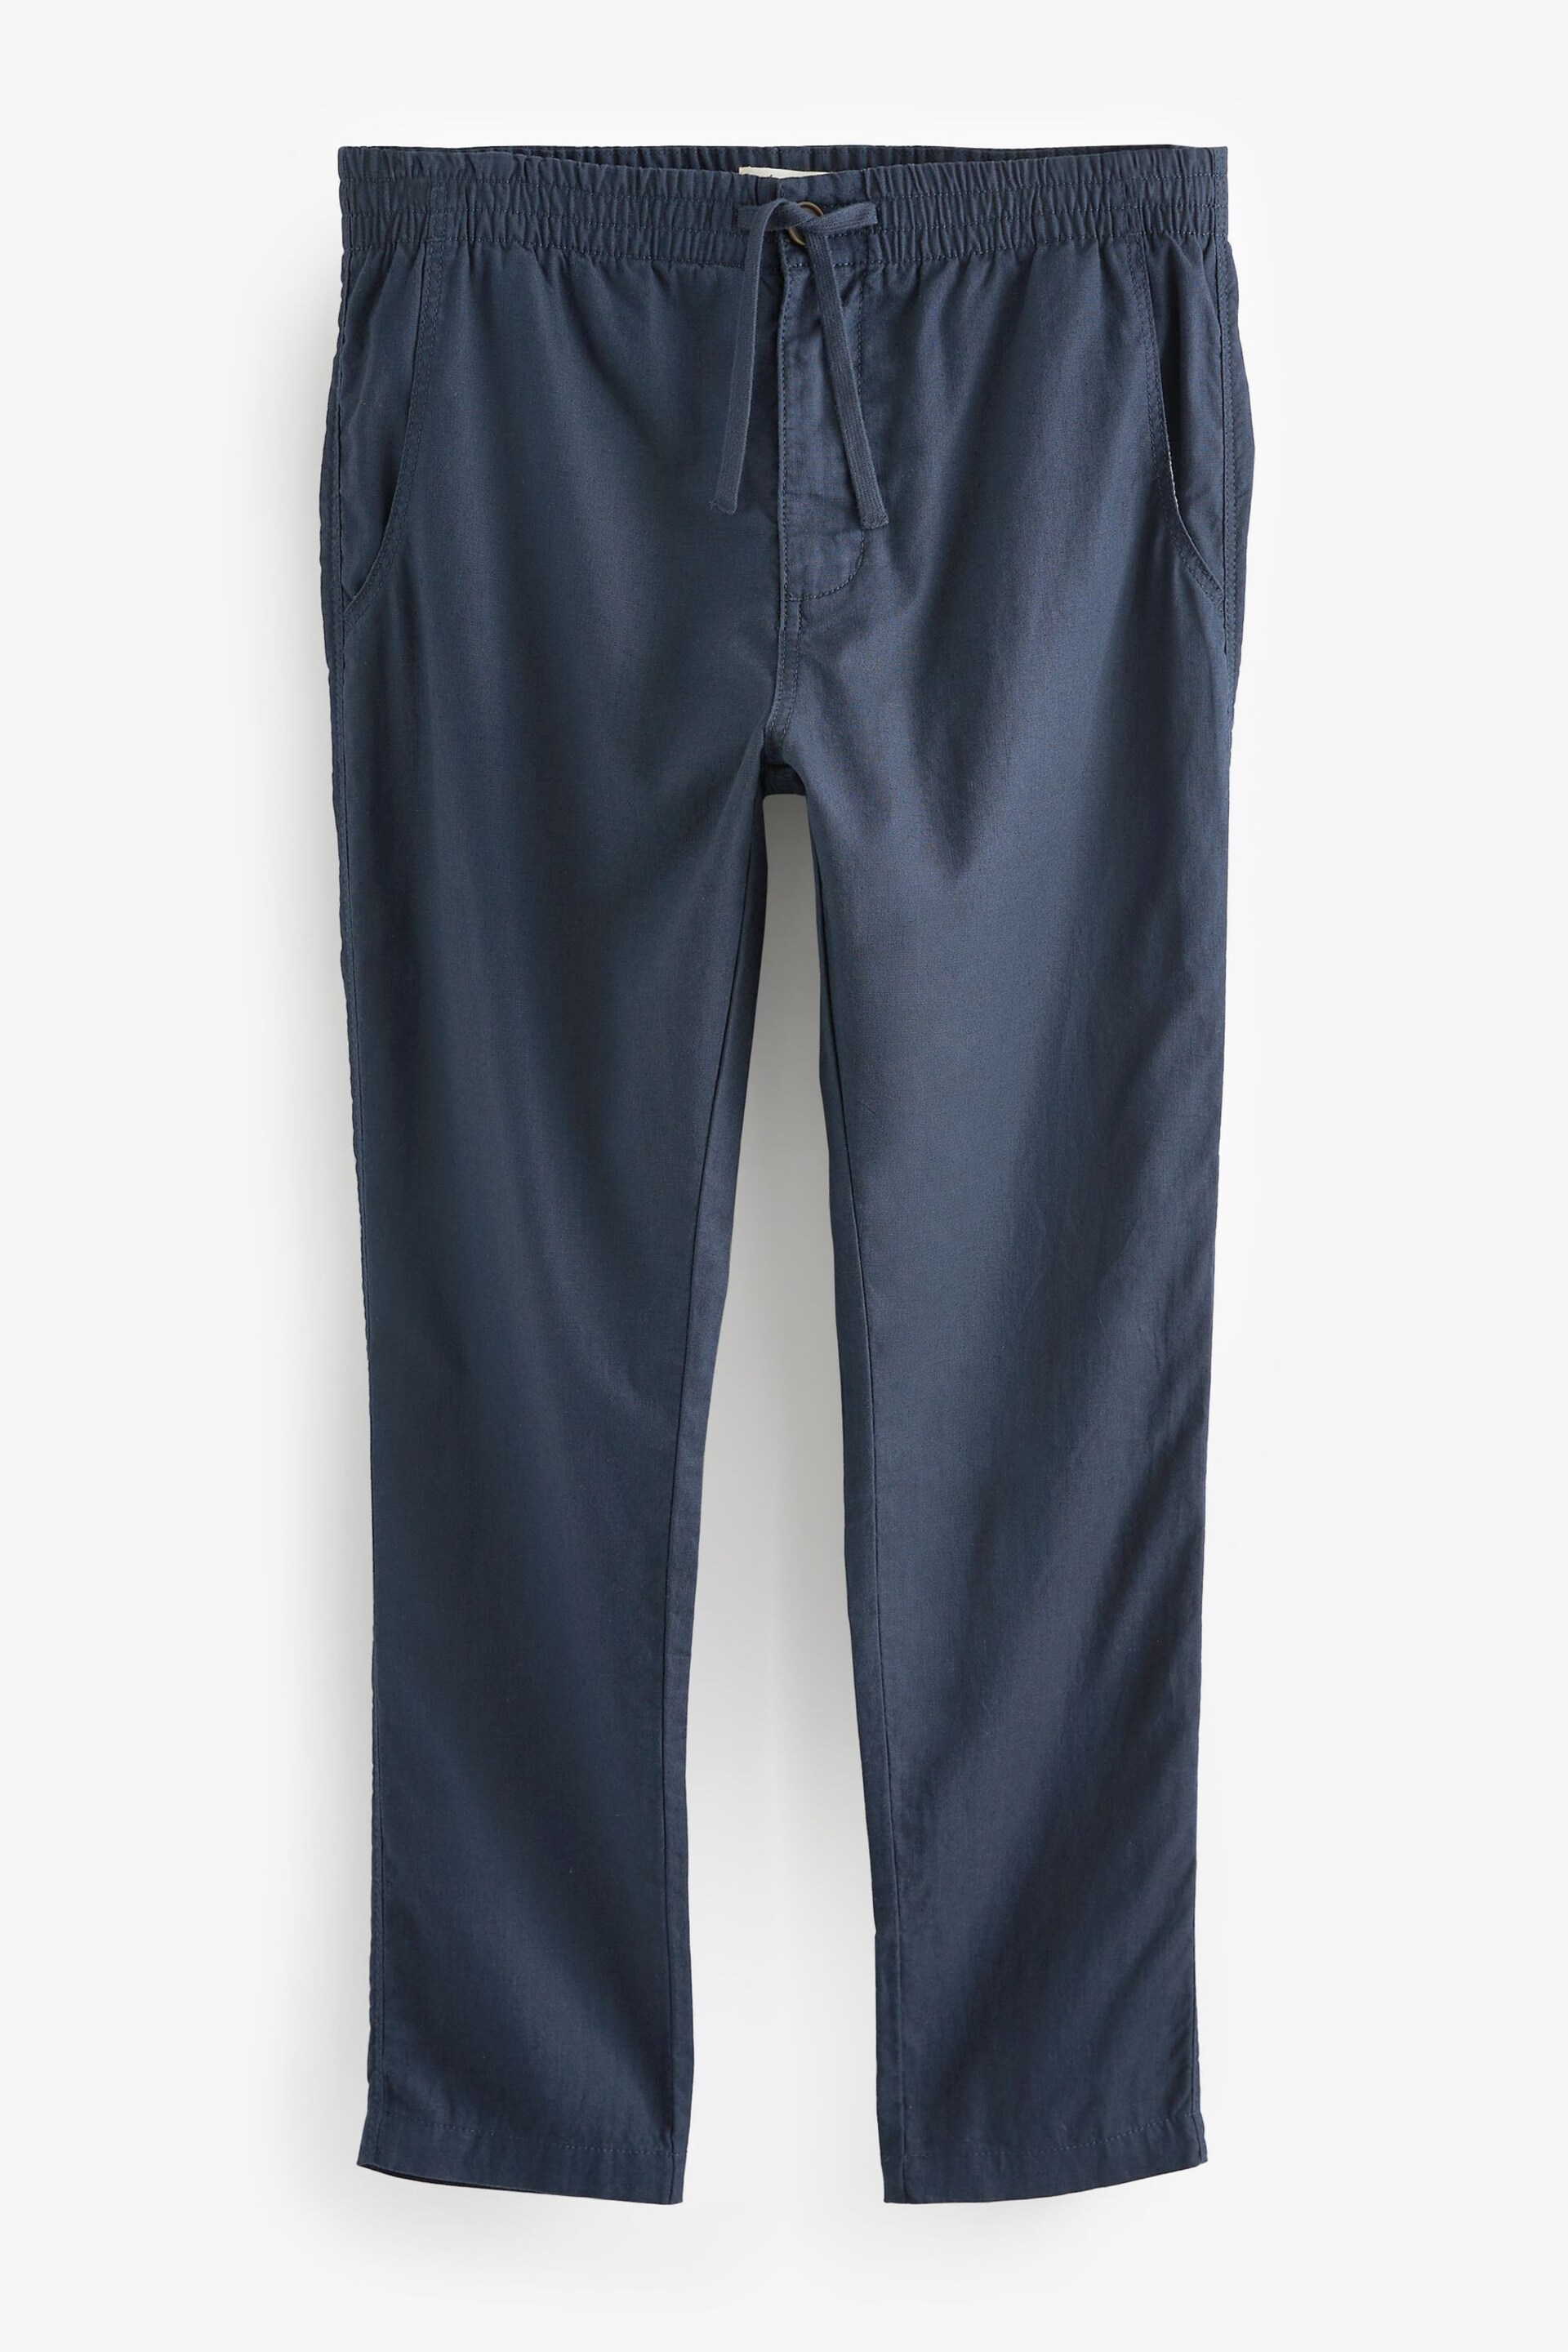 Navy Blue Slim Fit Linen Cotton Elasticated Drawstring Trousers - Image 7 of 11